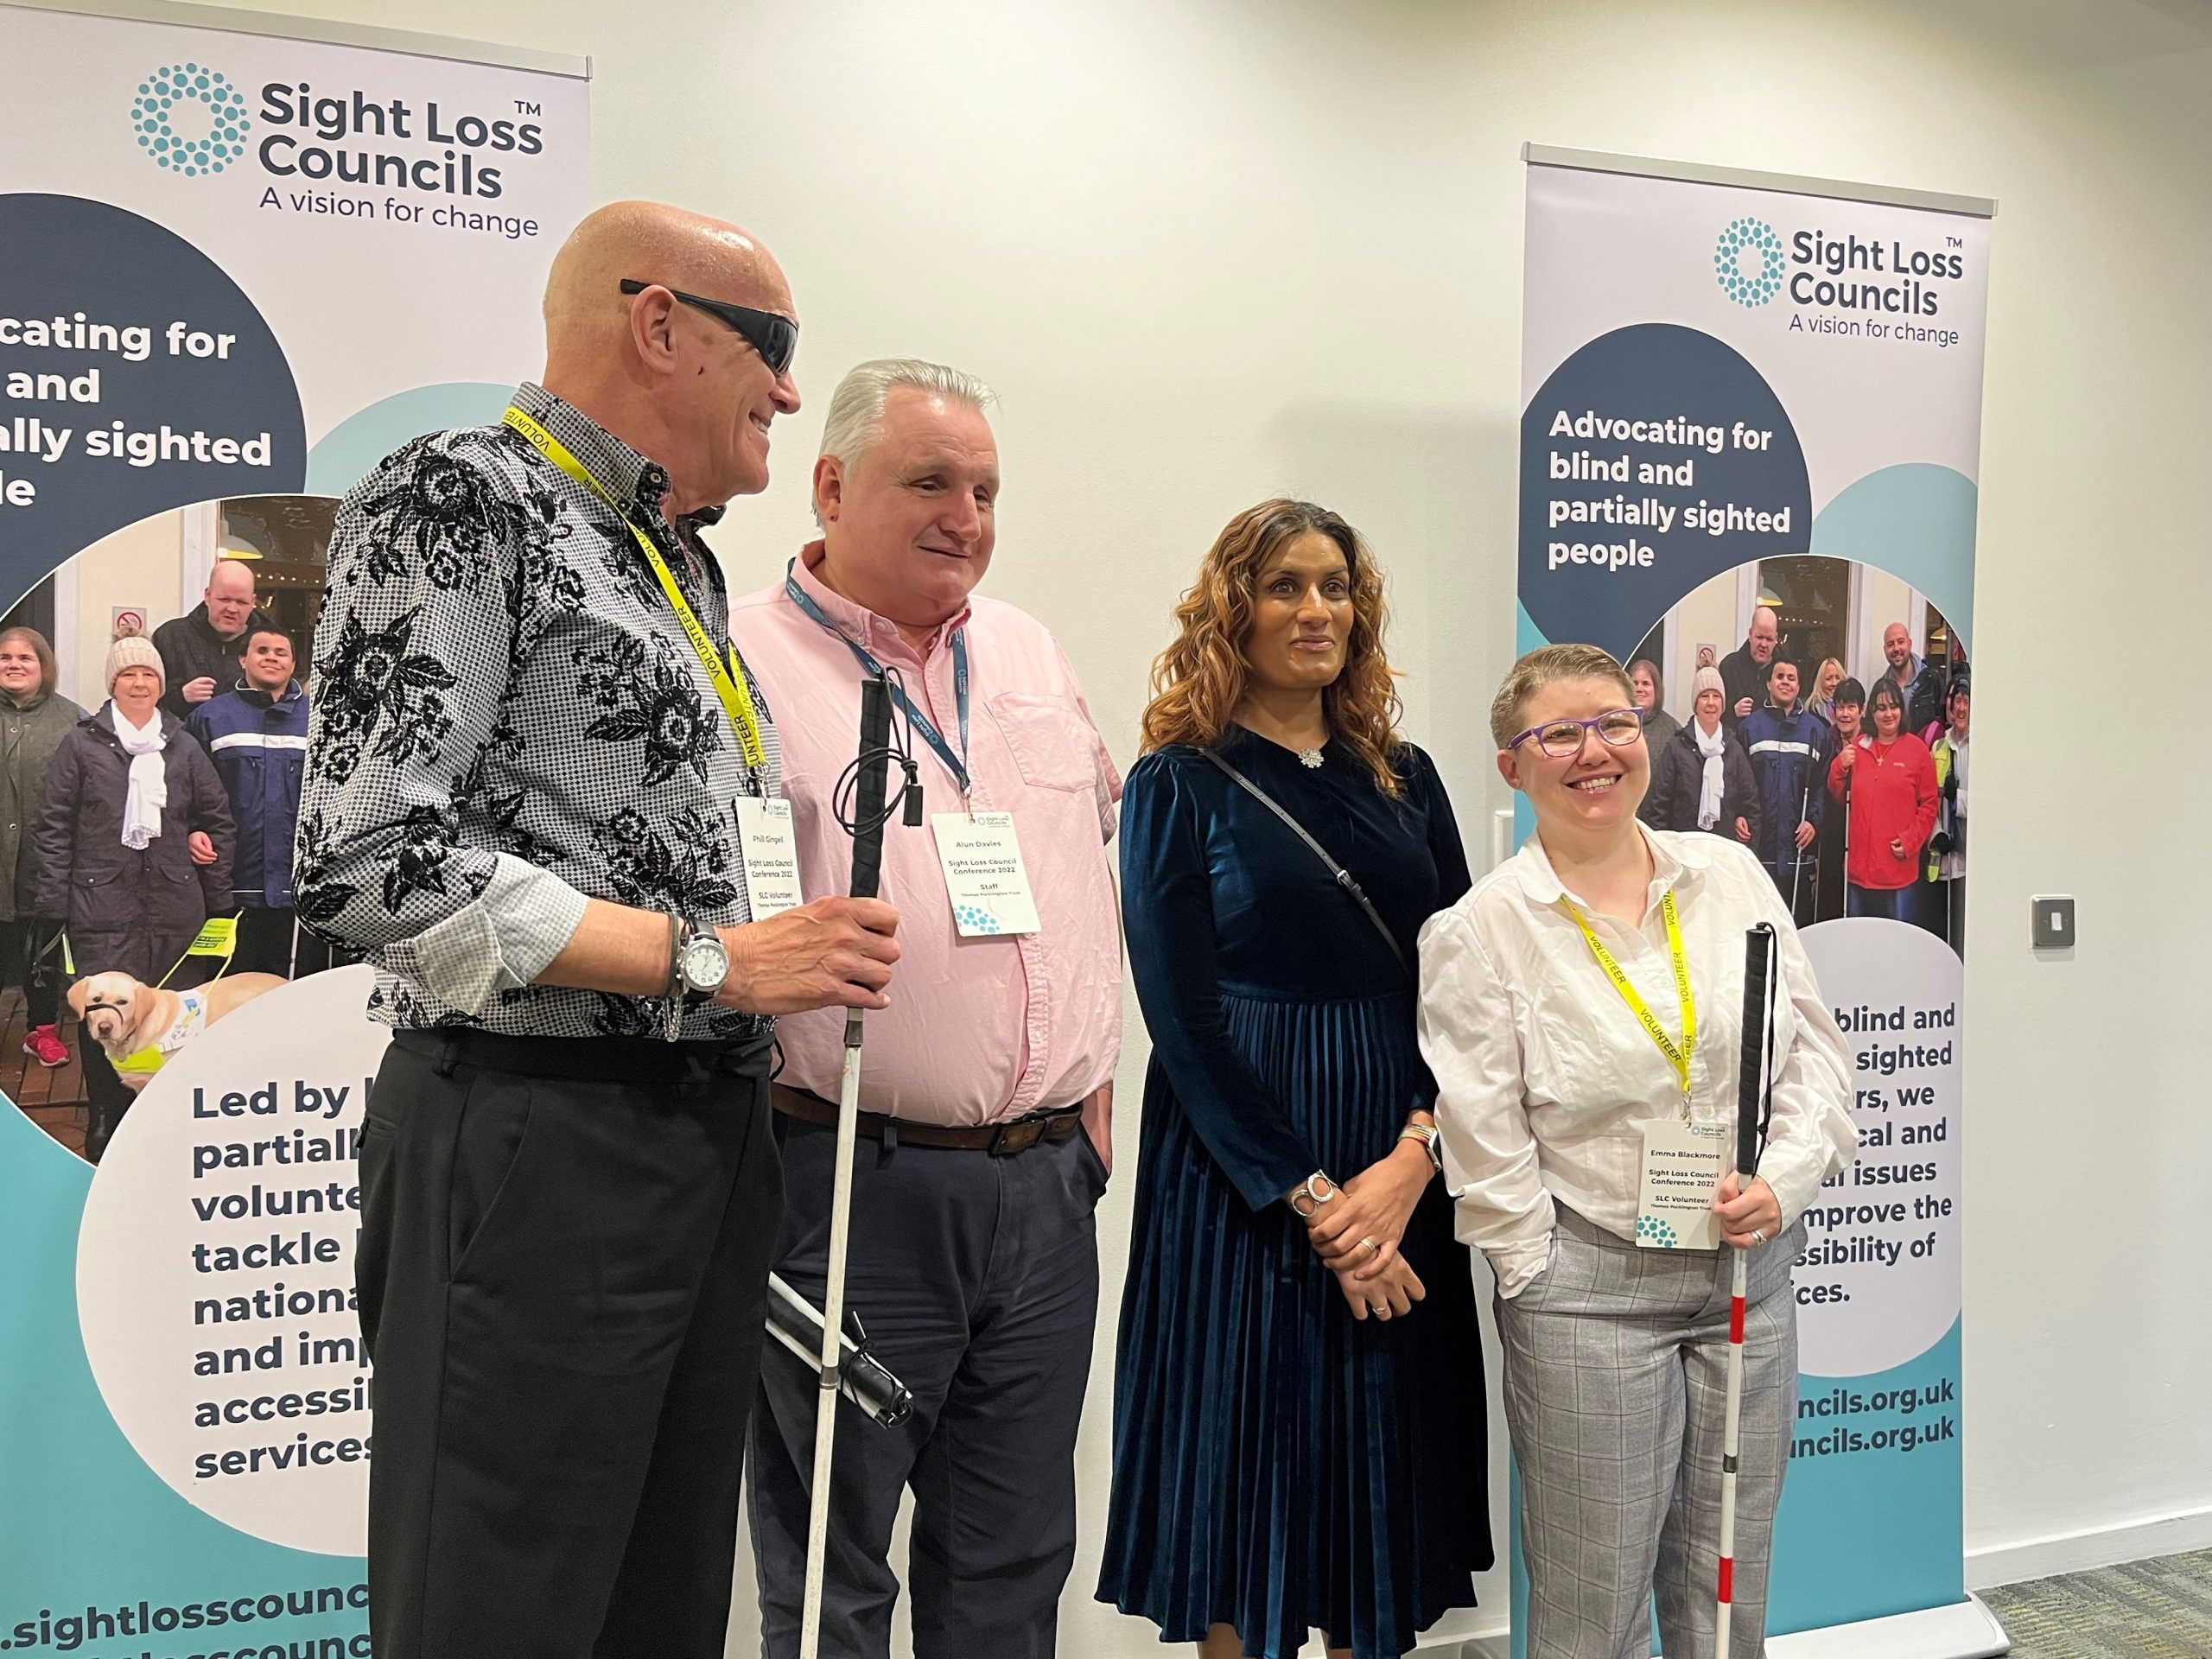 From left to right: West of England SLC member, Phil, Engagement Manager Alun Davies, and SLC members Anela and Emma. They are stood together at the 2022 Sight Loss Council conference in front of the SLC banners. They are having their photo taken by the official photograpaher.